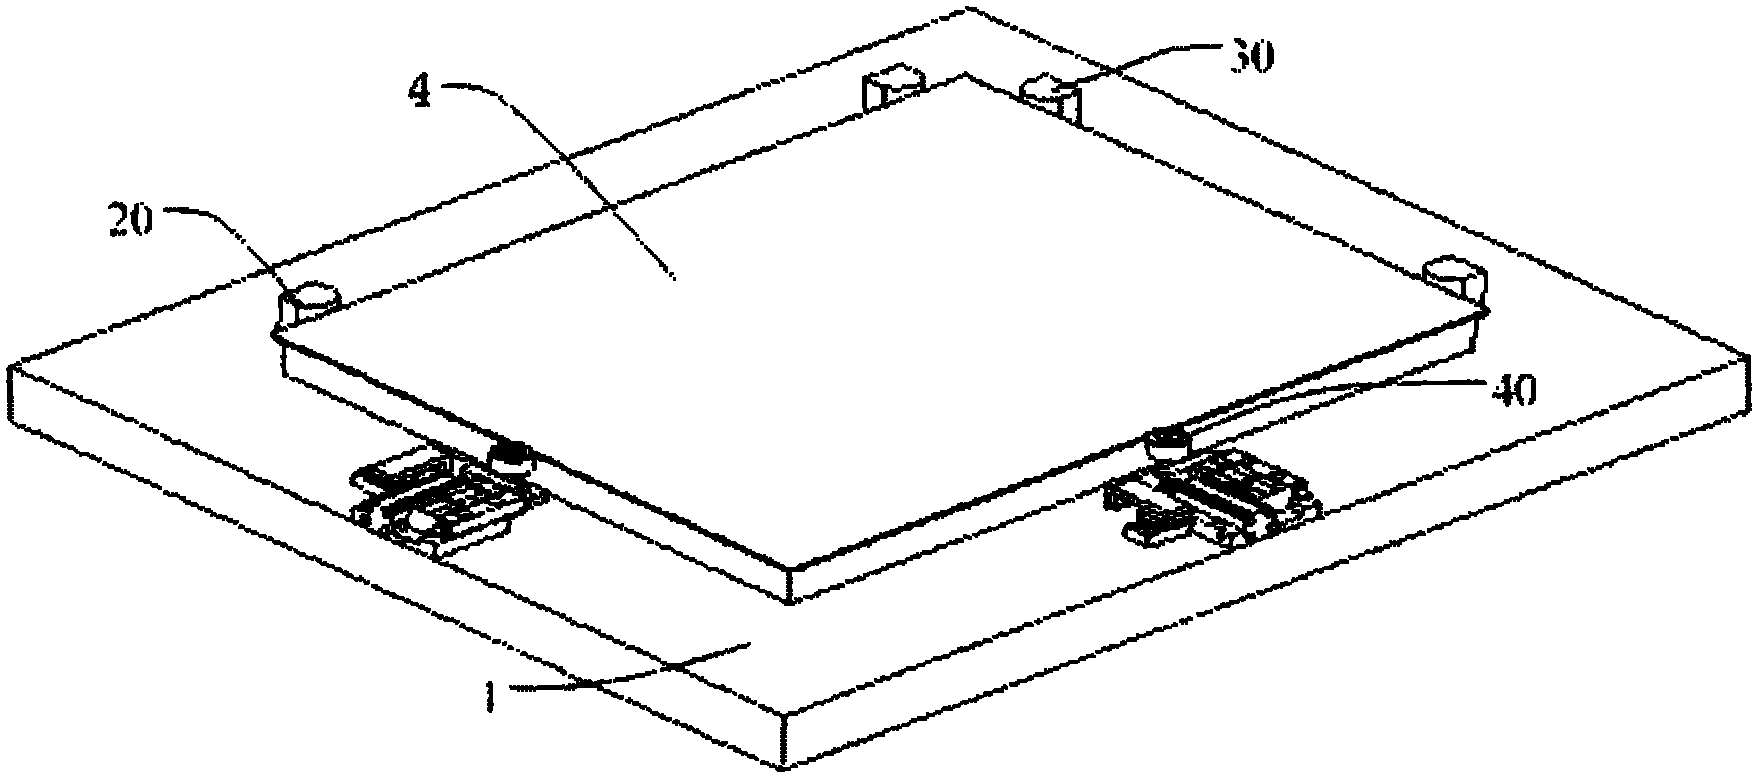 Substrate-precise-positioning workpiece stage